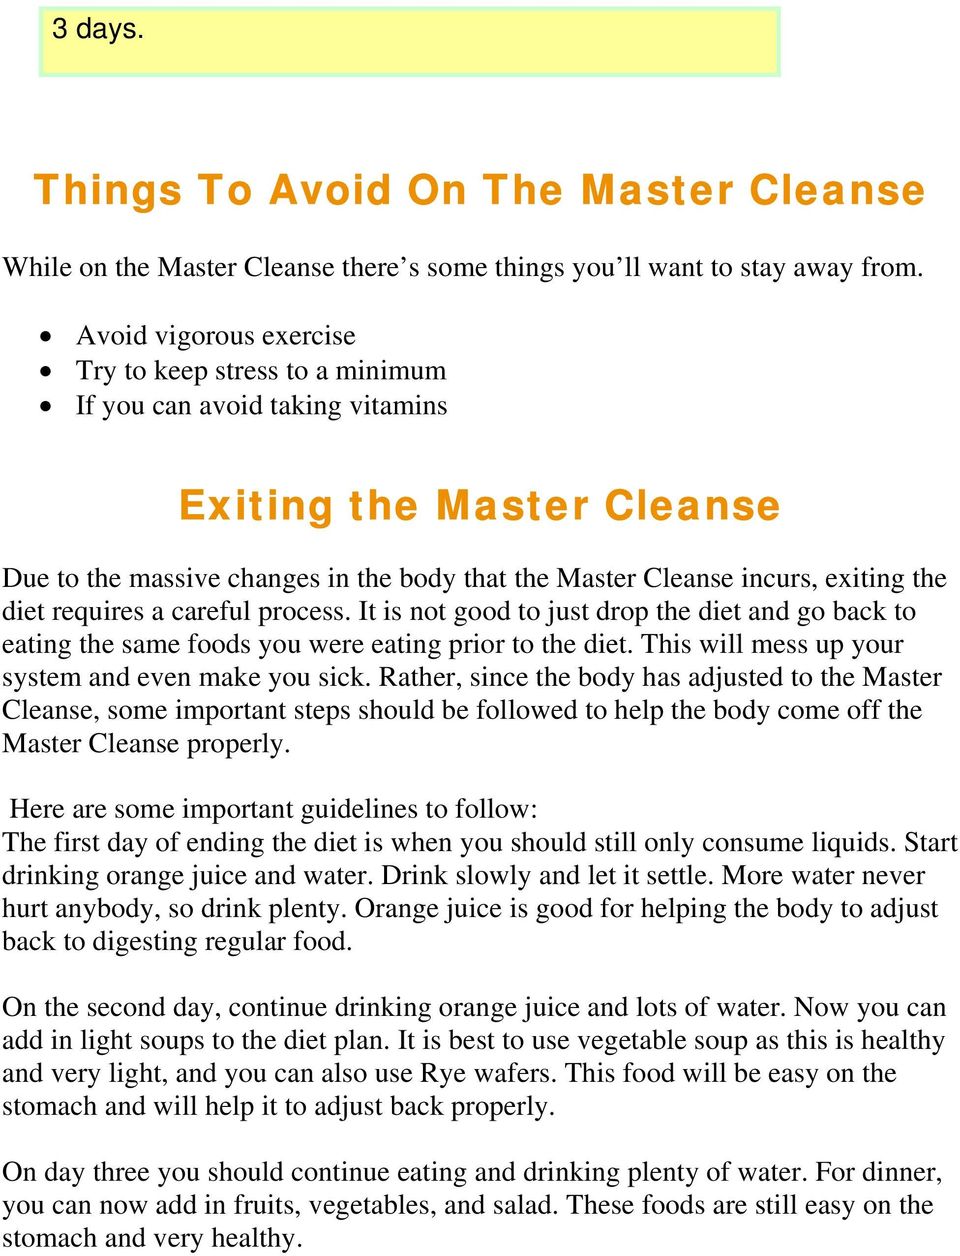 Master Cleanse Secrets Success Steps For Succeeding On The Master Cleanse - Pdf Free Download